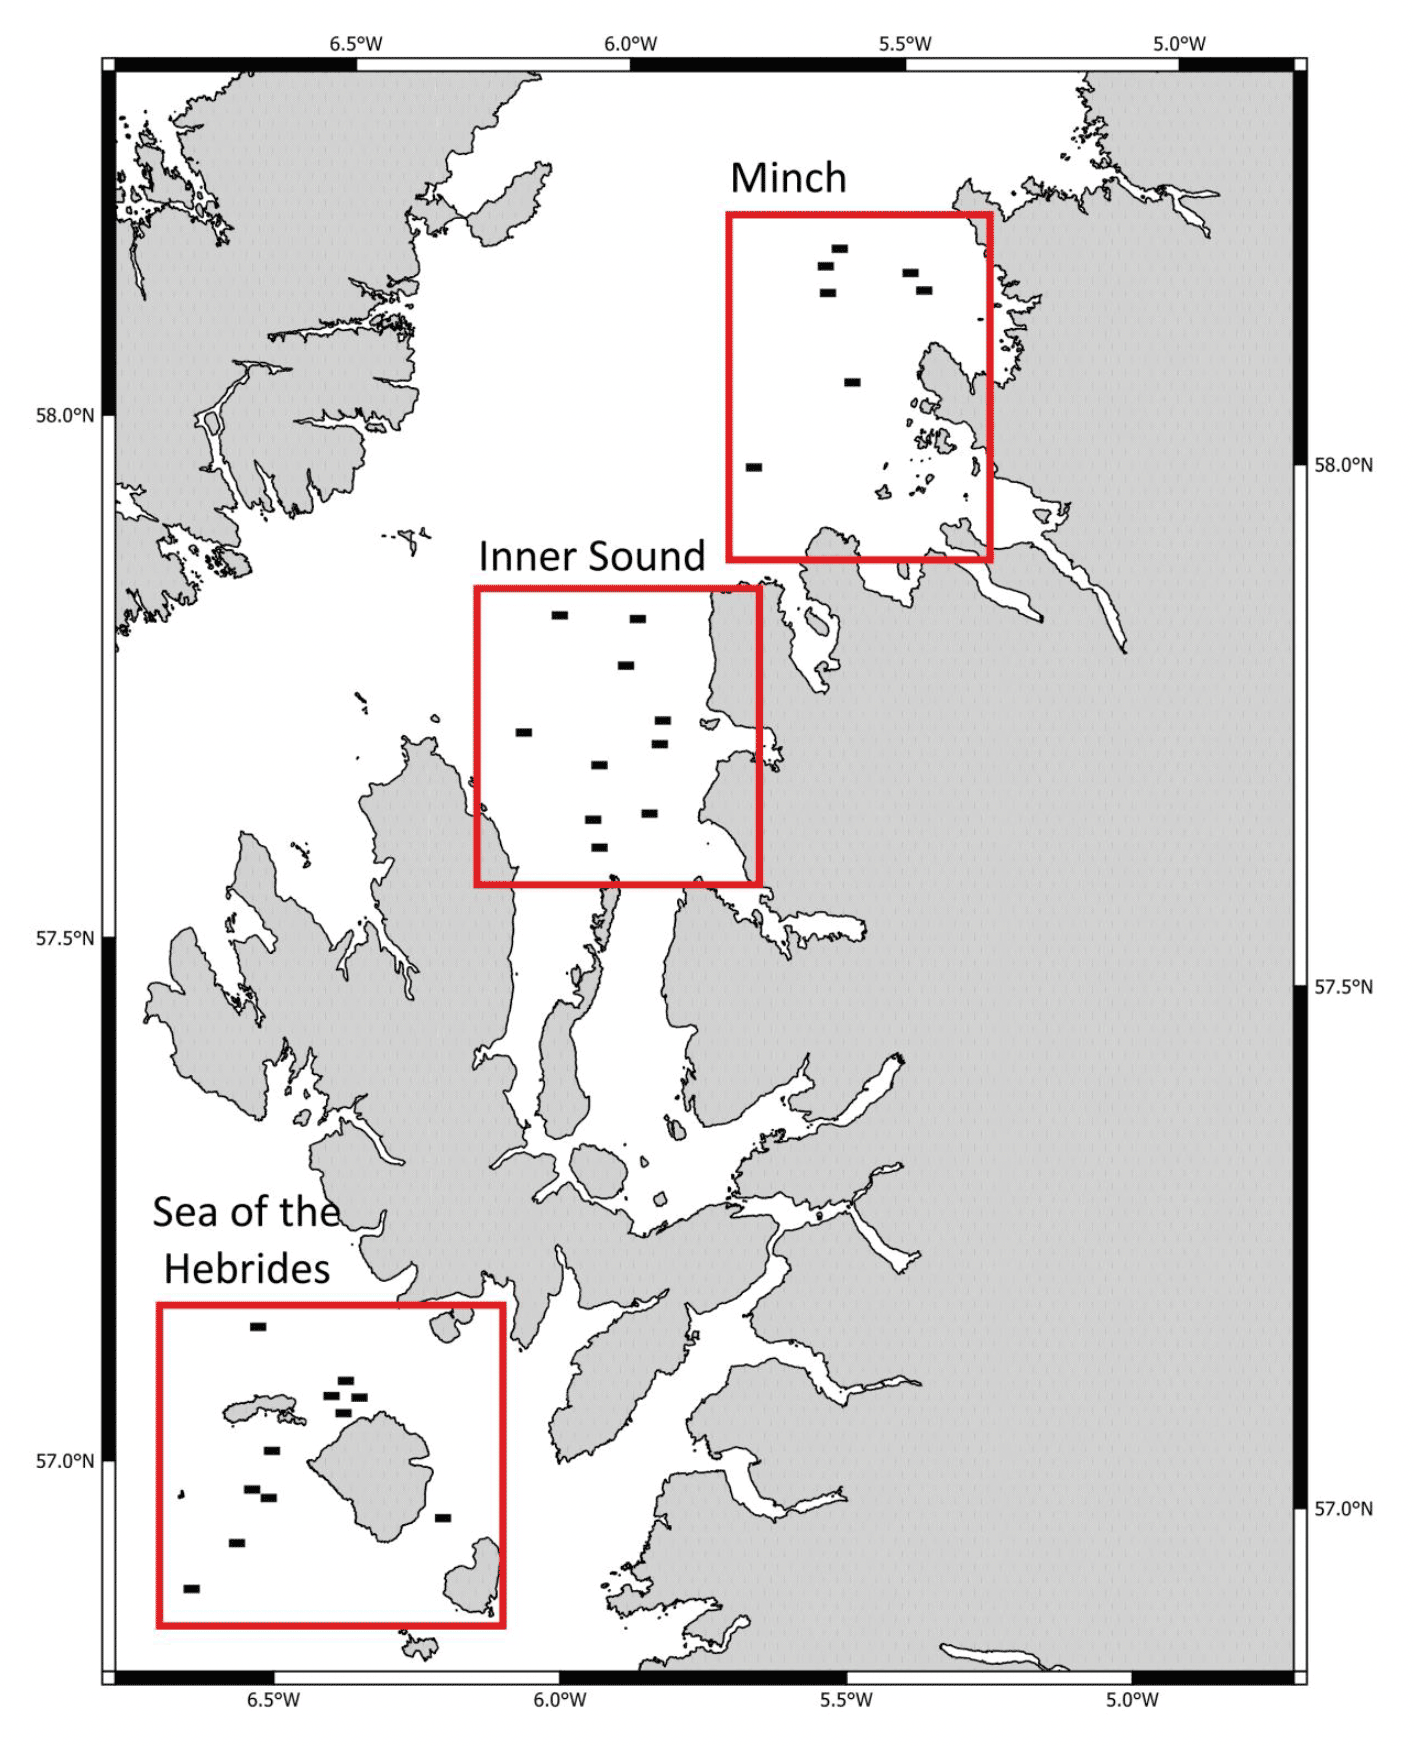 Survey boxes for the fishing effects study are located in the Minch (northeast: top right), inner sound (middle) and Sea of the Hebrides (southwest: bottom left).